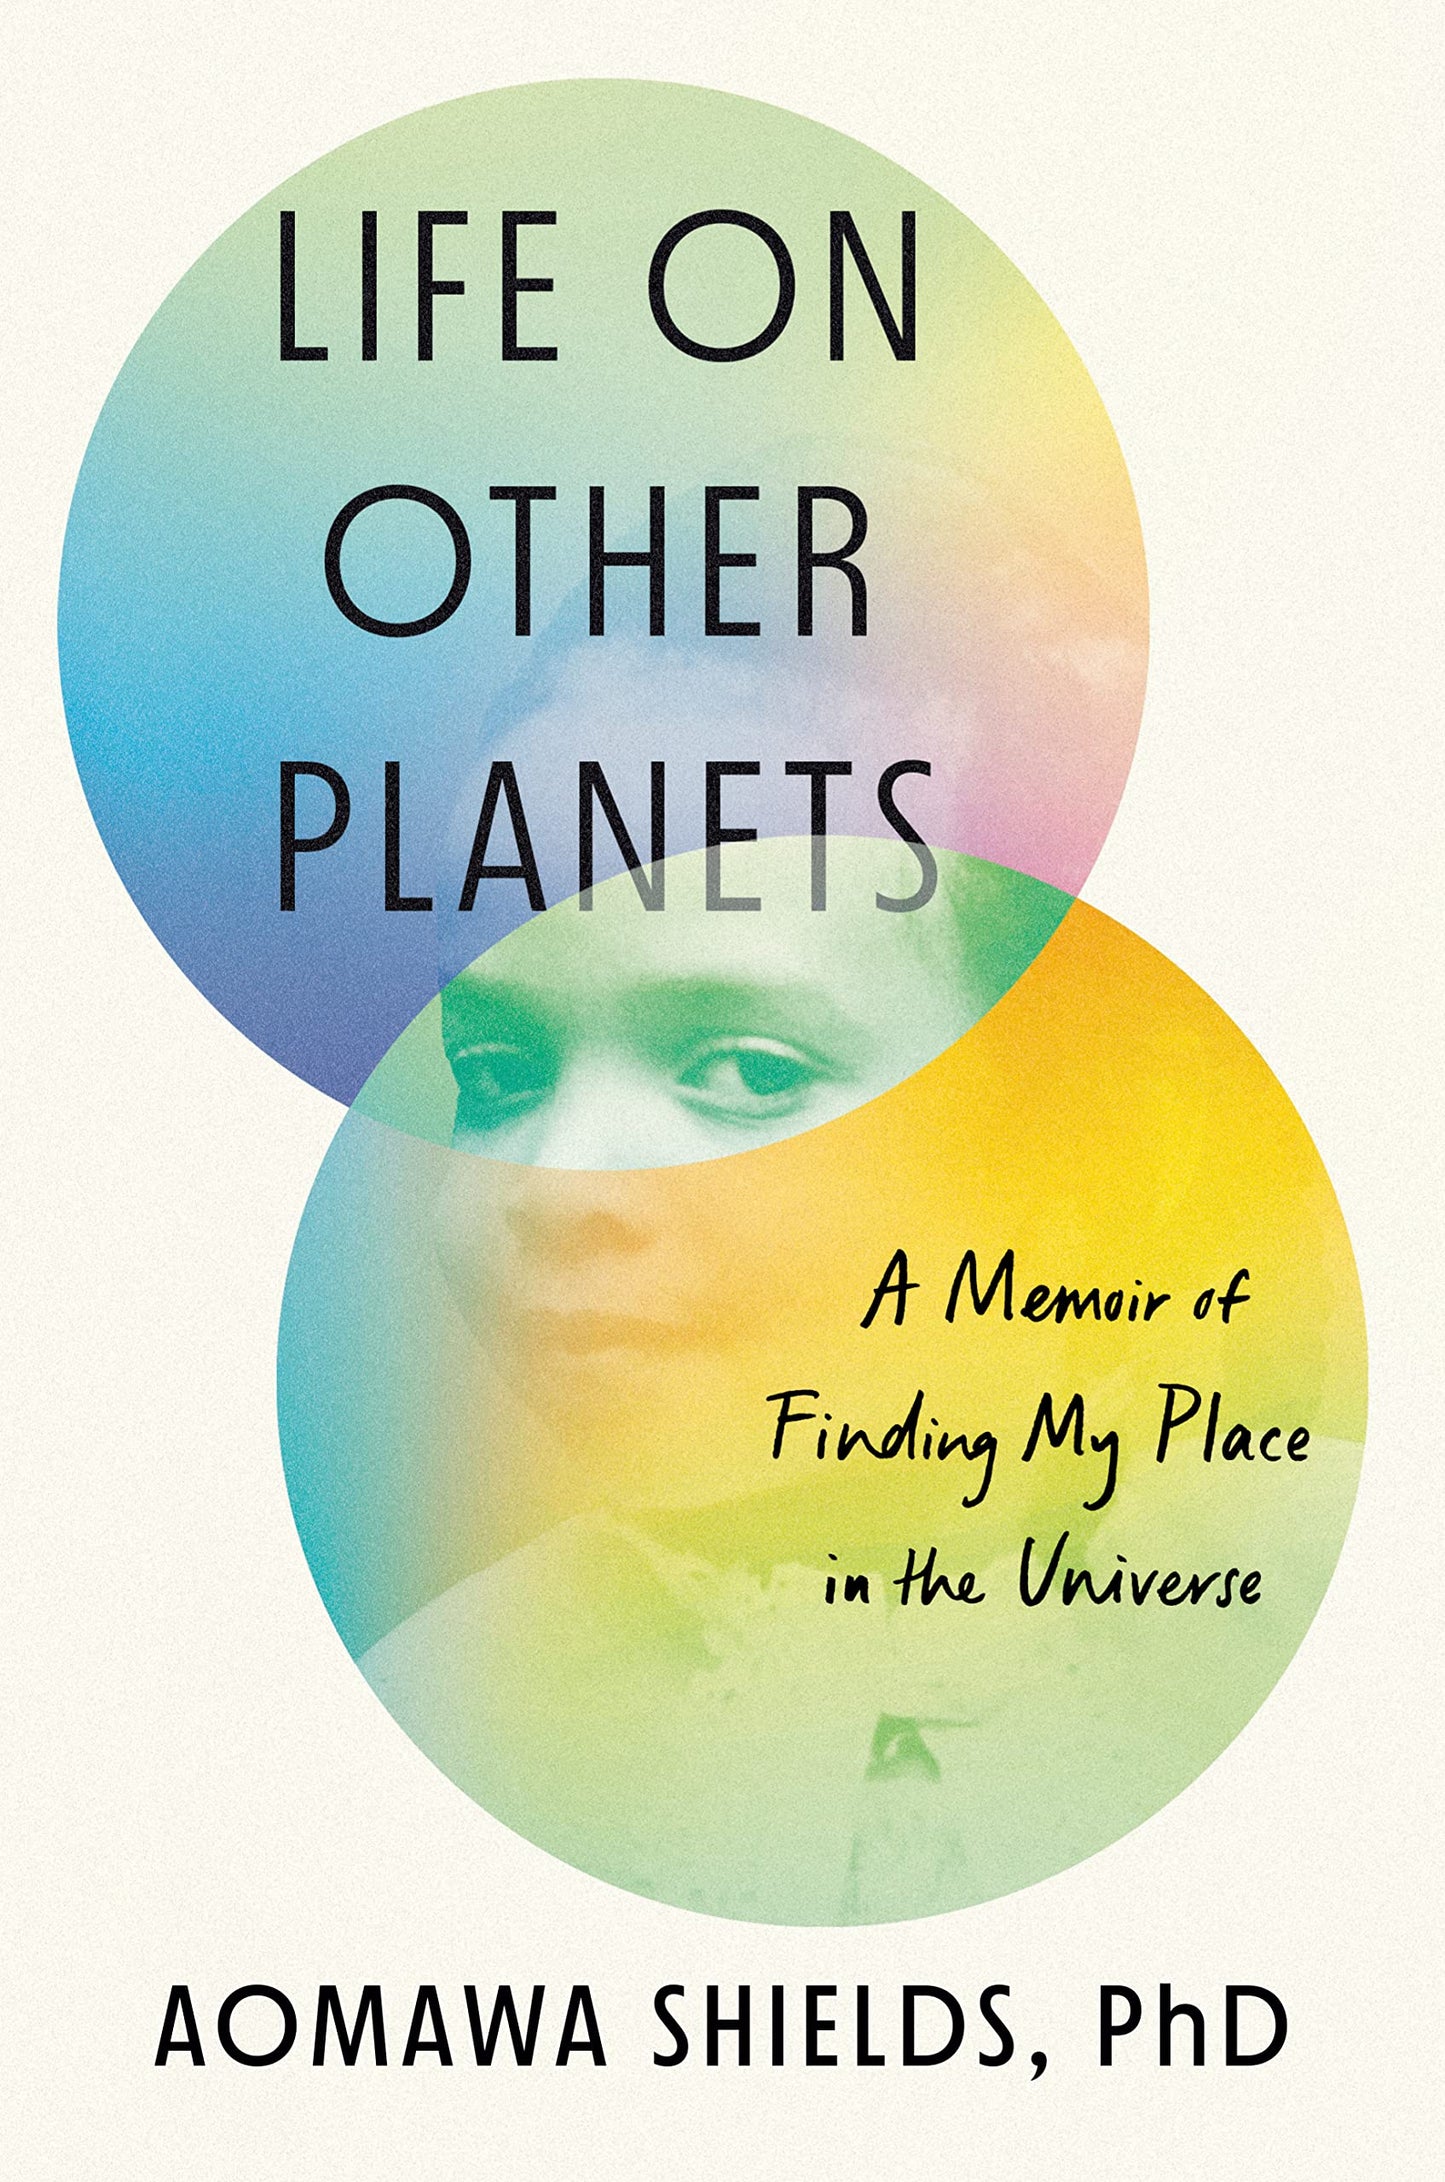 Life on Other Planets // A Memoir of Finding My Place in the Universe